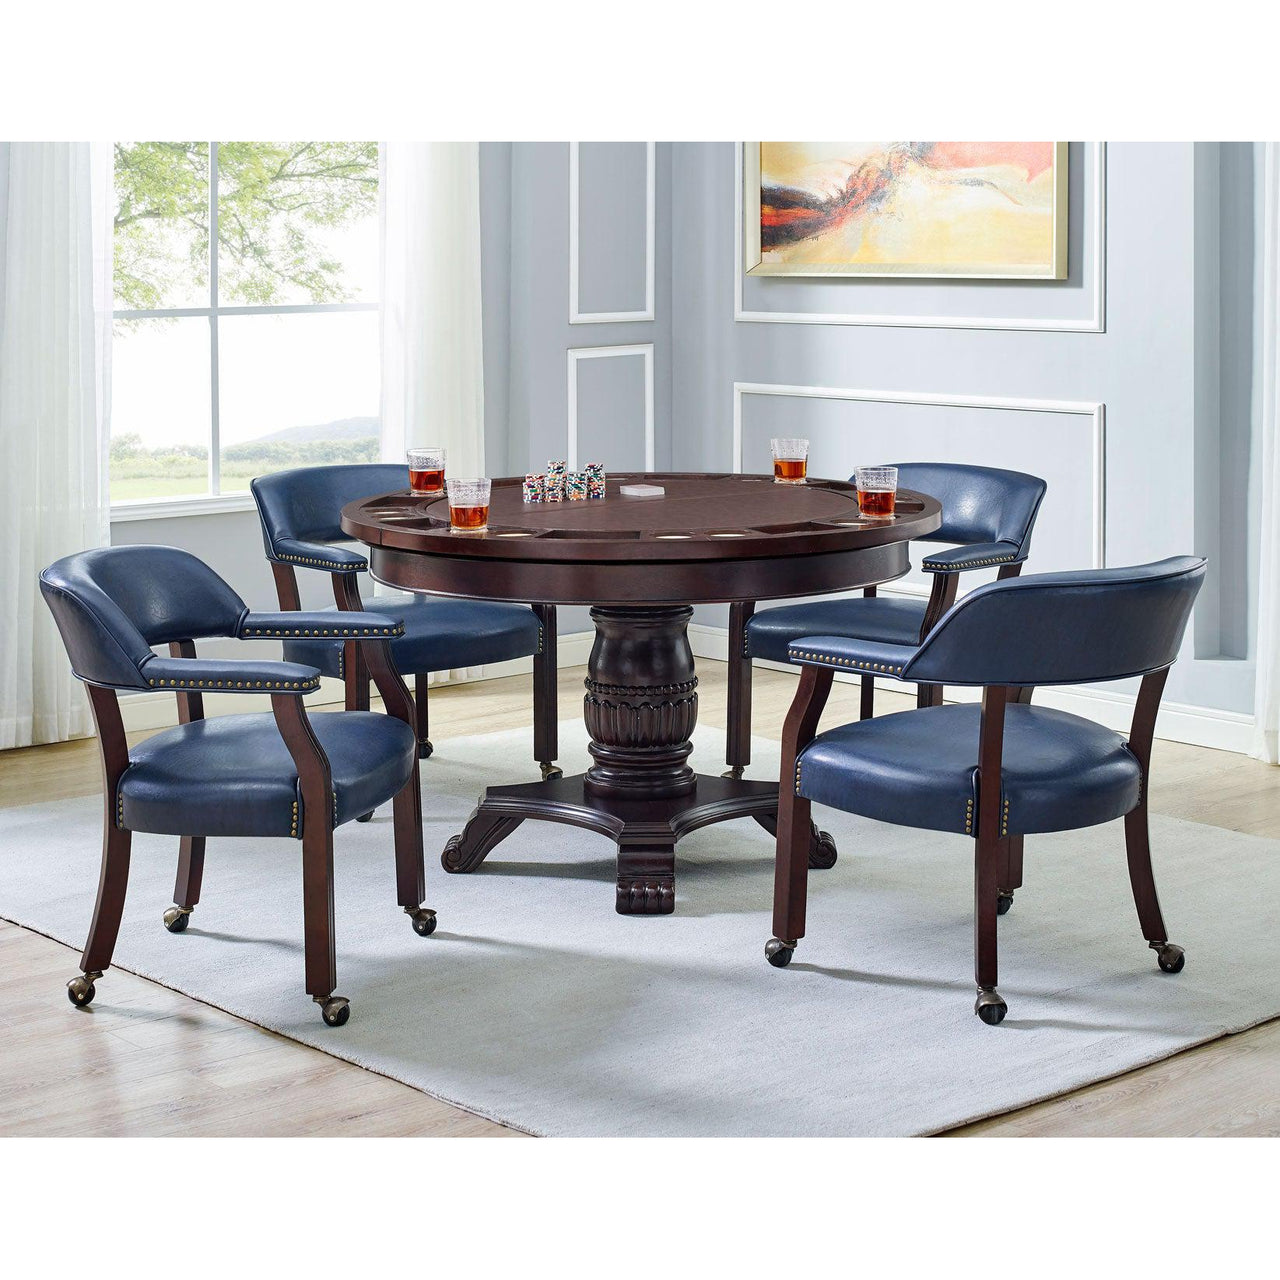 Convertible Poker Table Set Tournament in Navy with matching Chairs-AMERICANA-POKER-TABLES